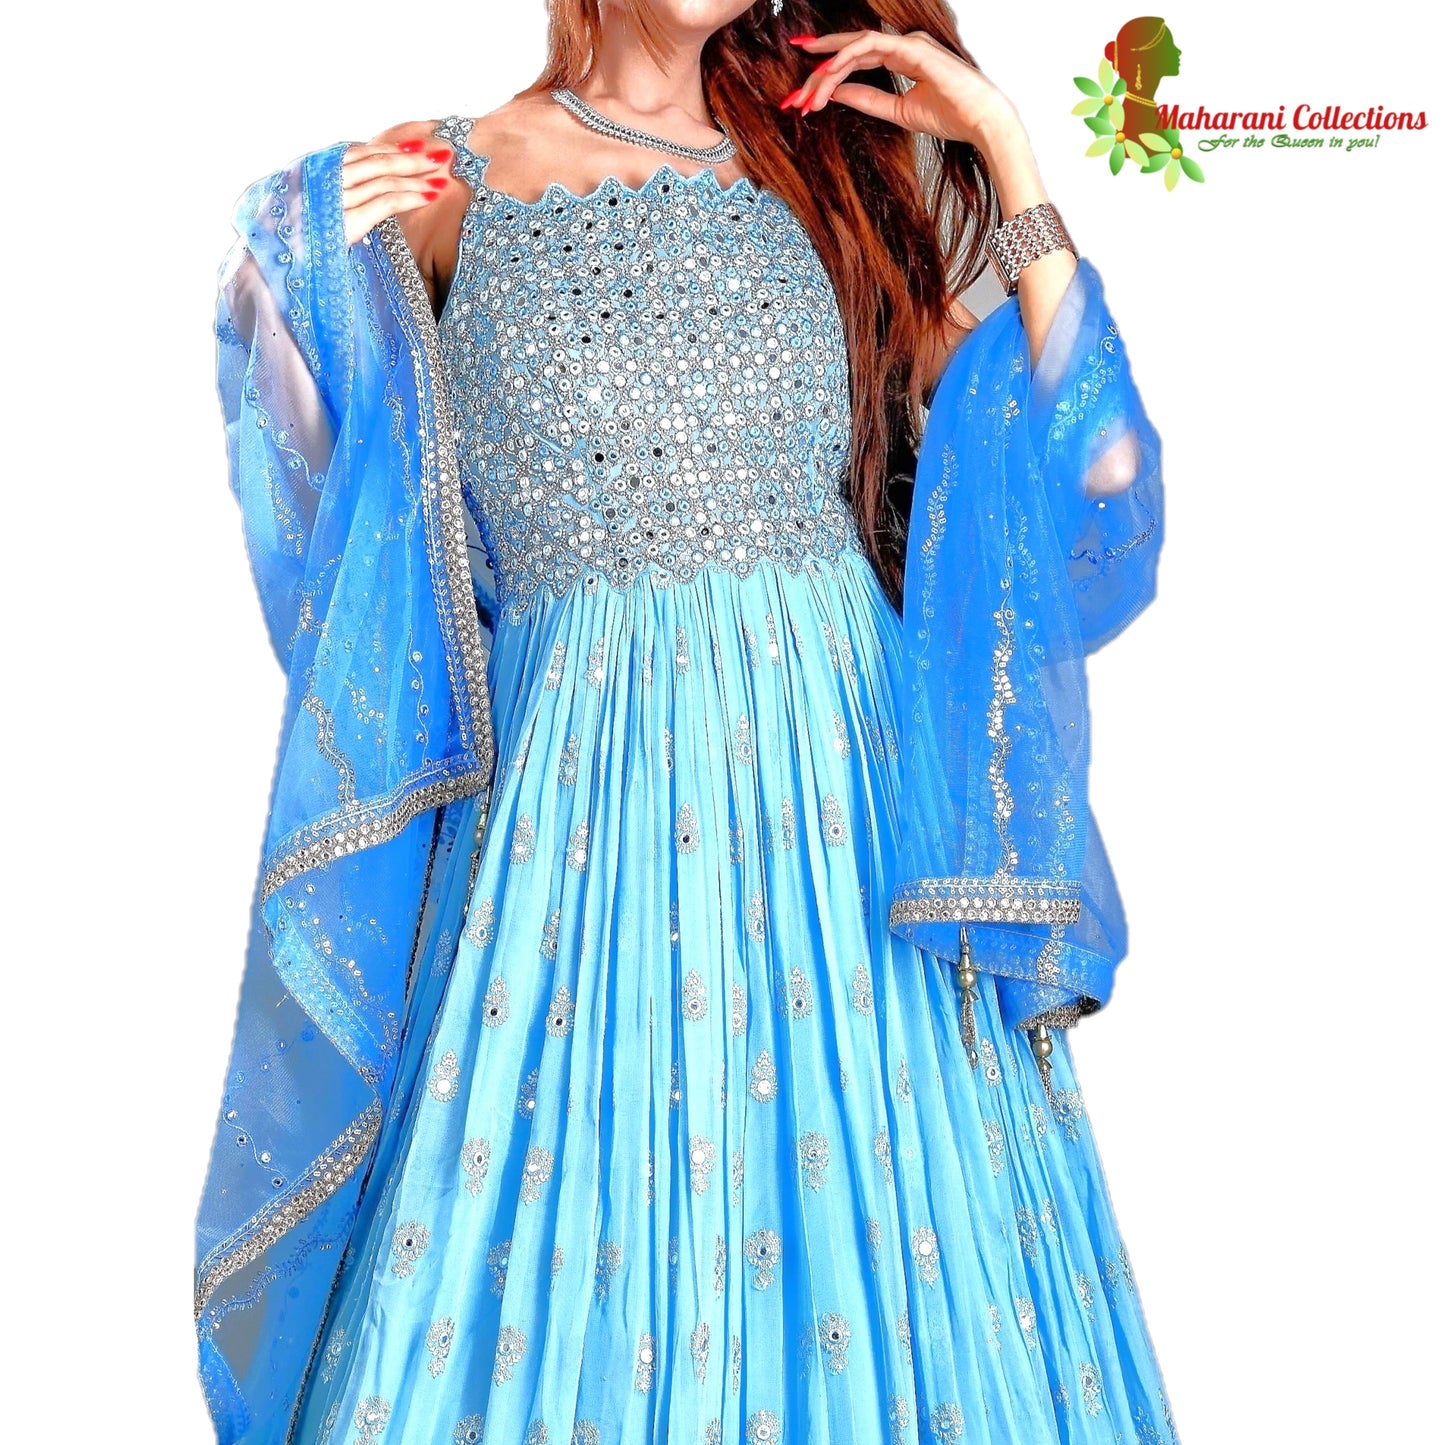 Maharani's Designer Ball (Princess) Gown - Sky Blue with Thread, Mirror & Sequins Work